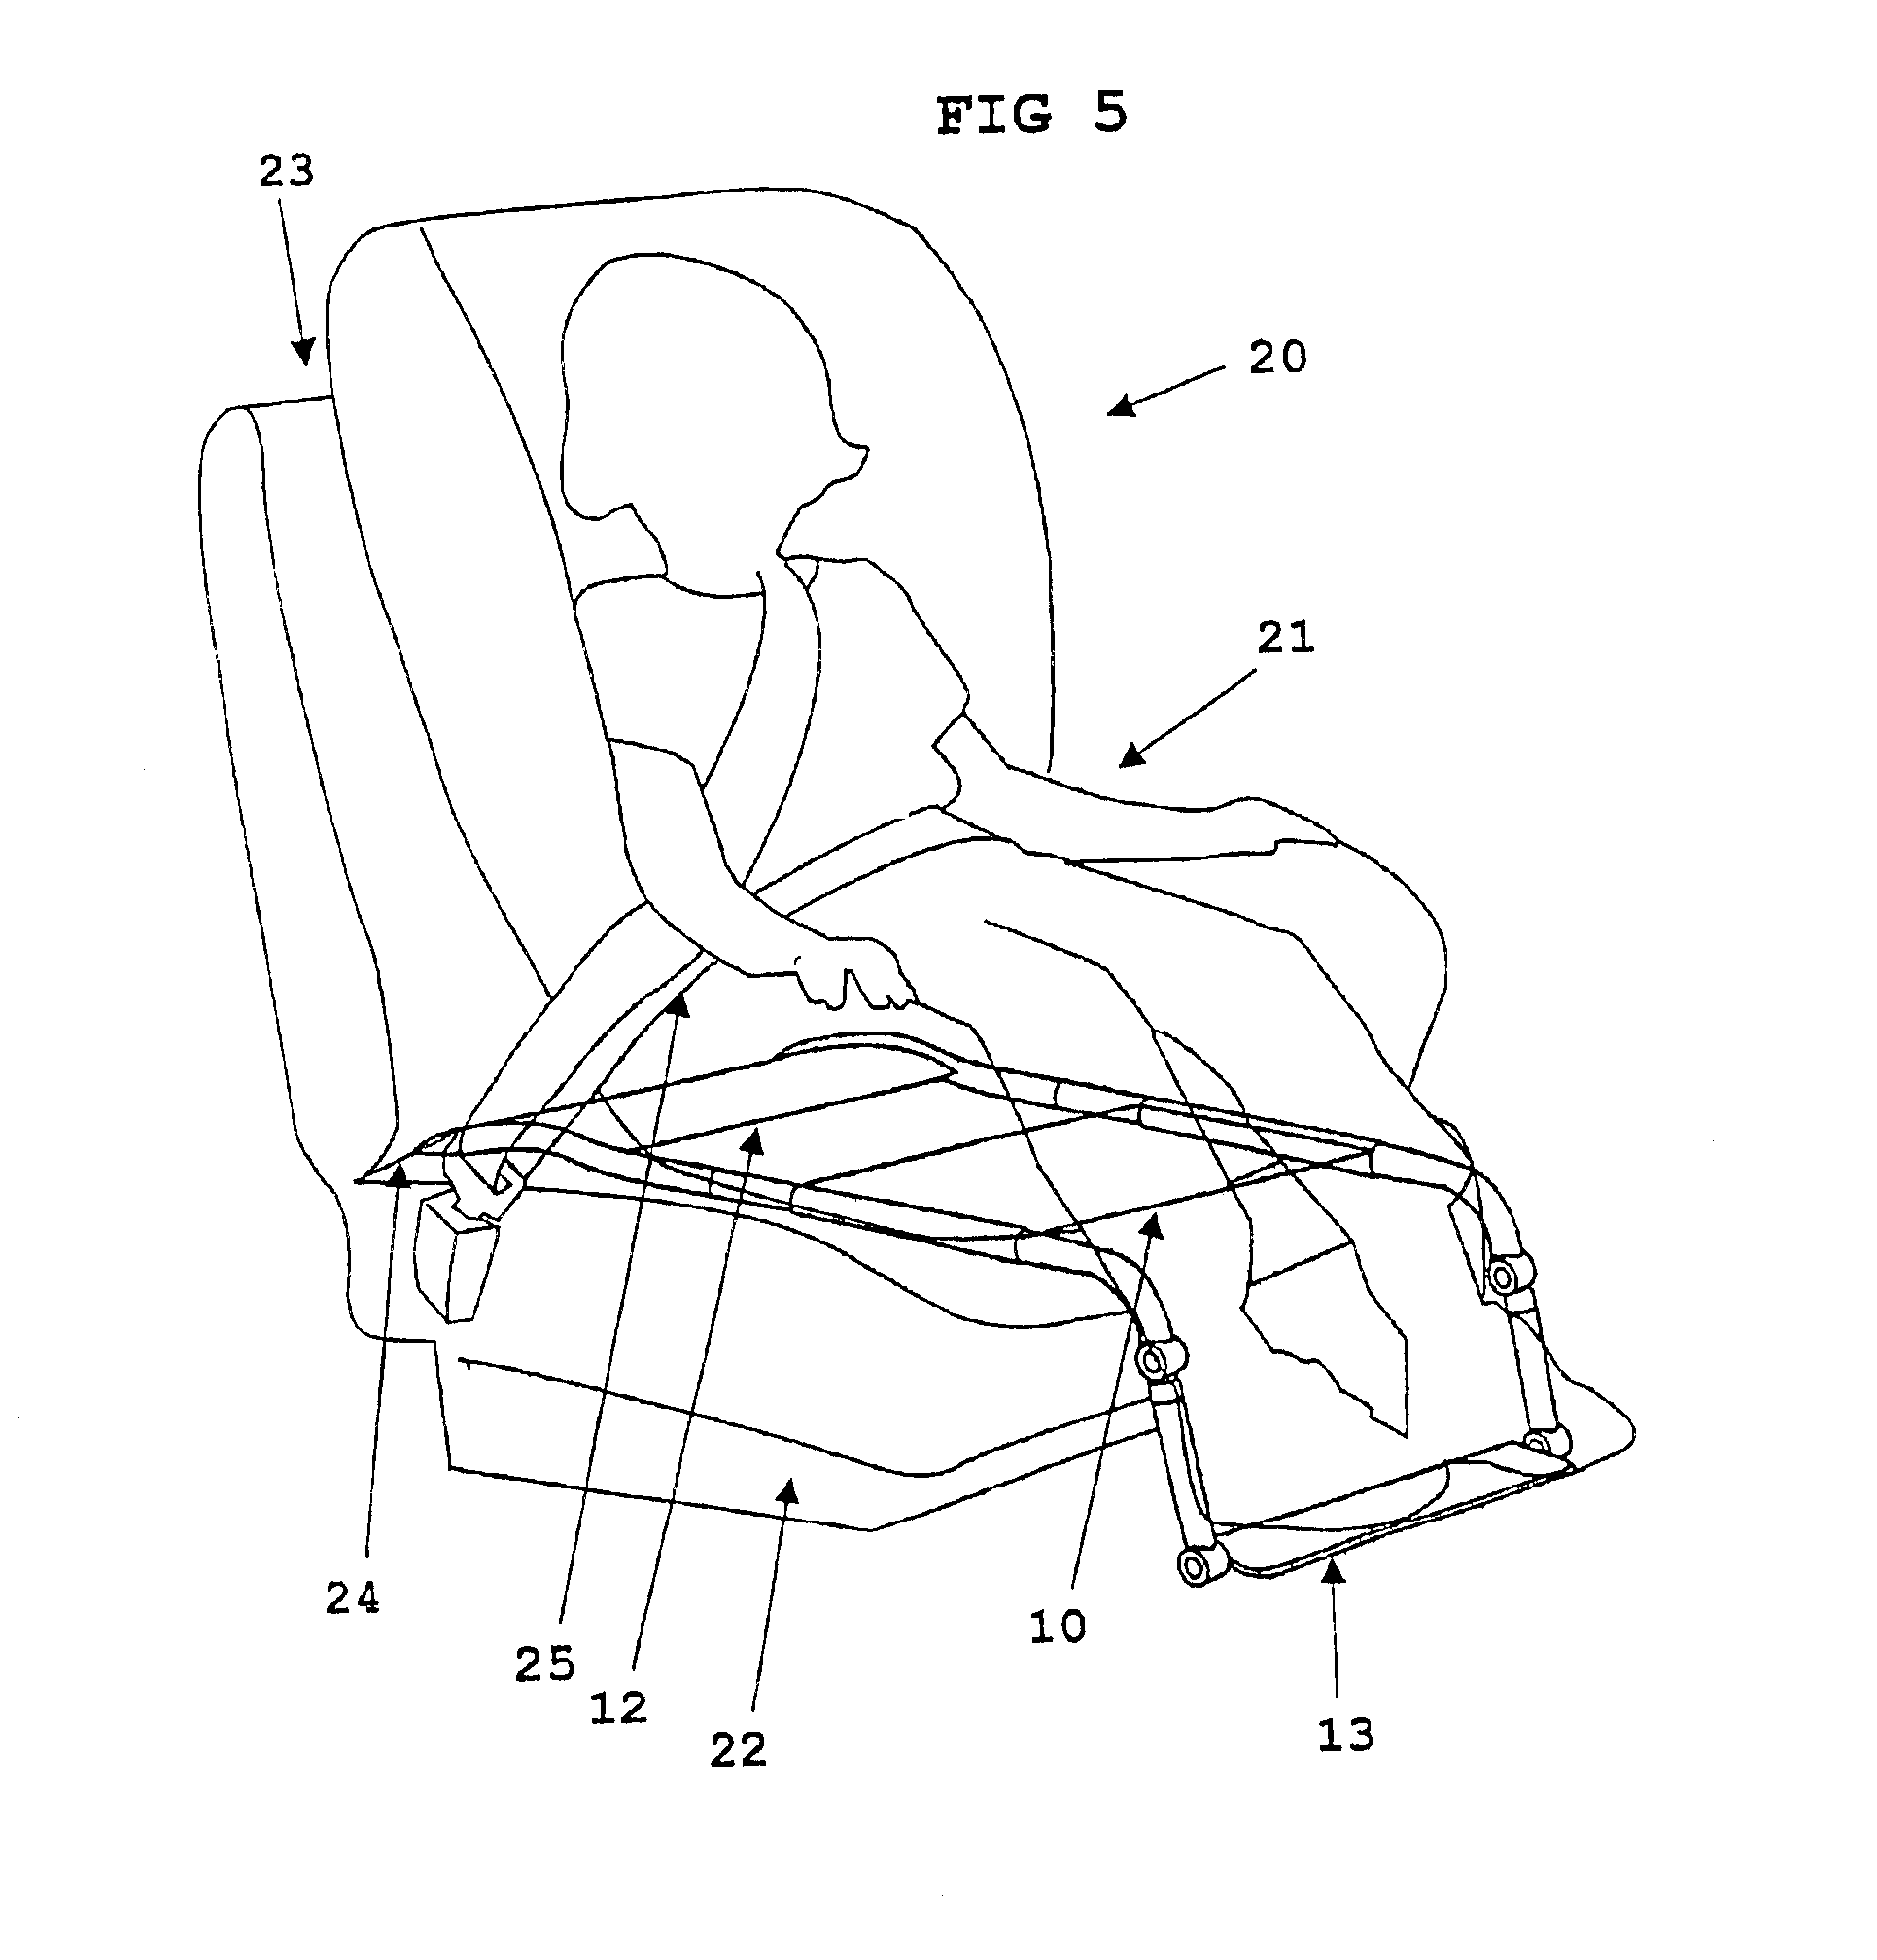 Footrest for a child safety seat